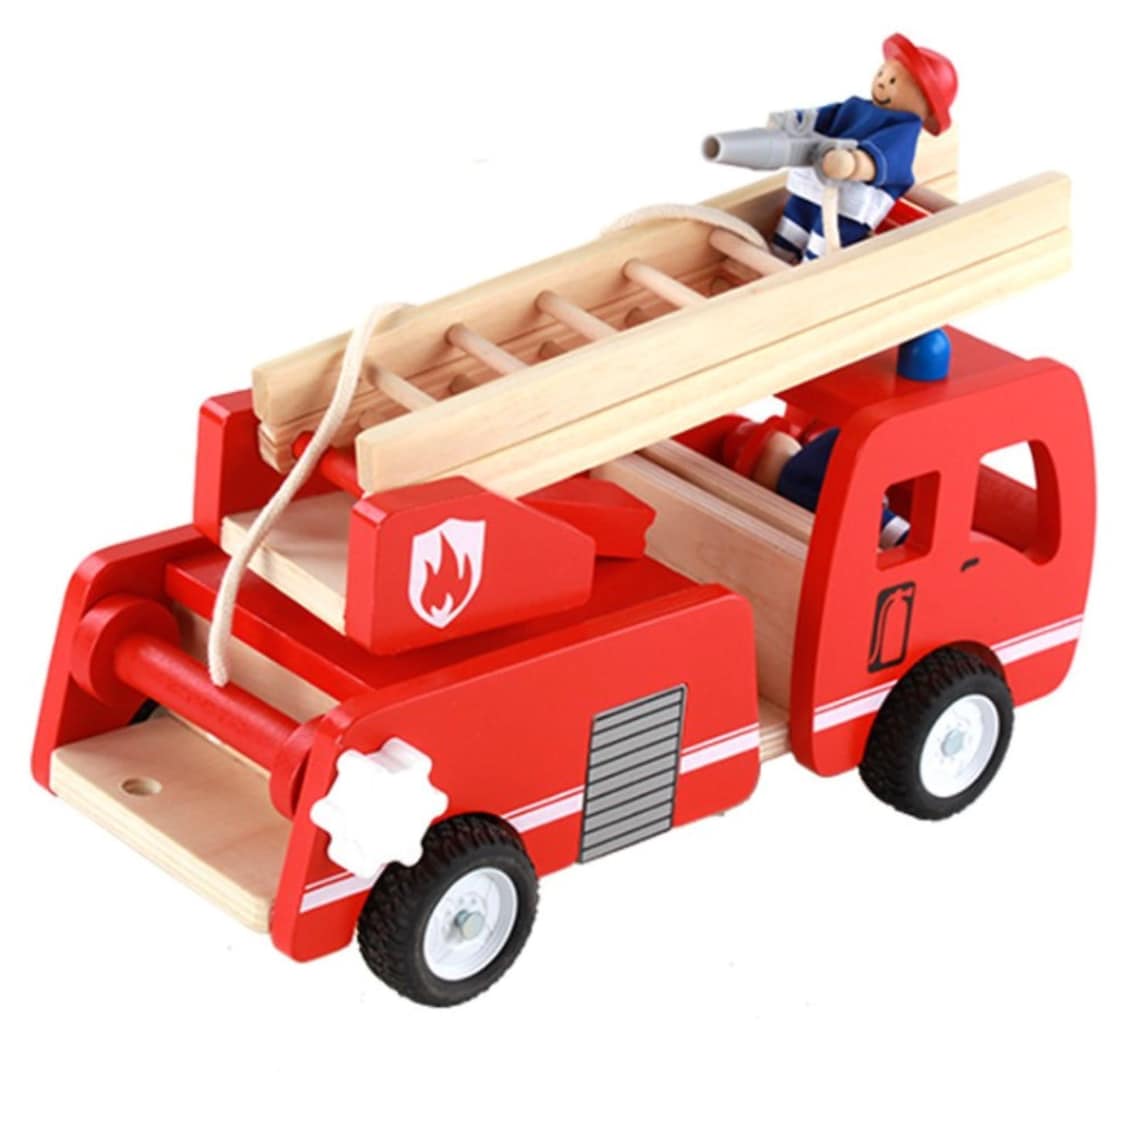 Fire truck wooden toy 3 years + with ladder and firemen Fire engine Red - Little Kids Business